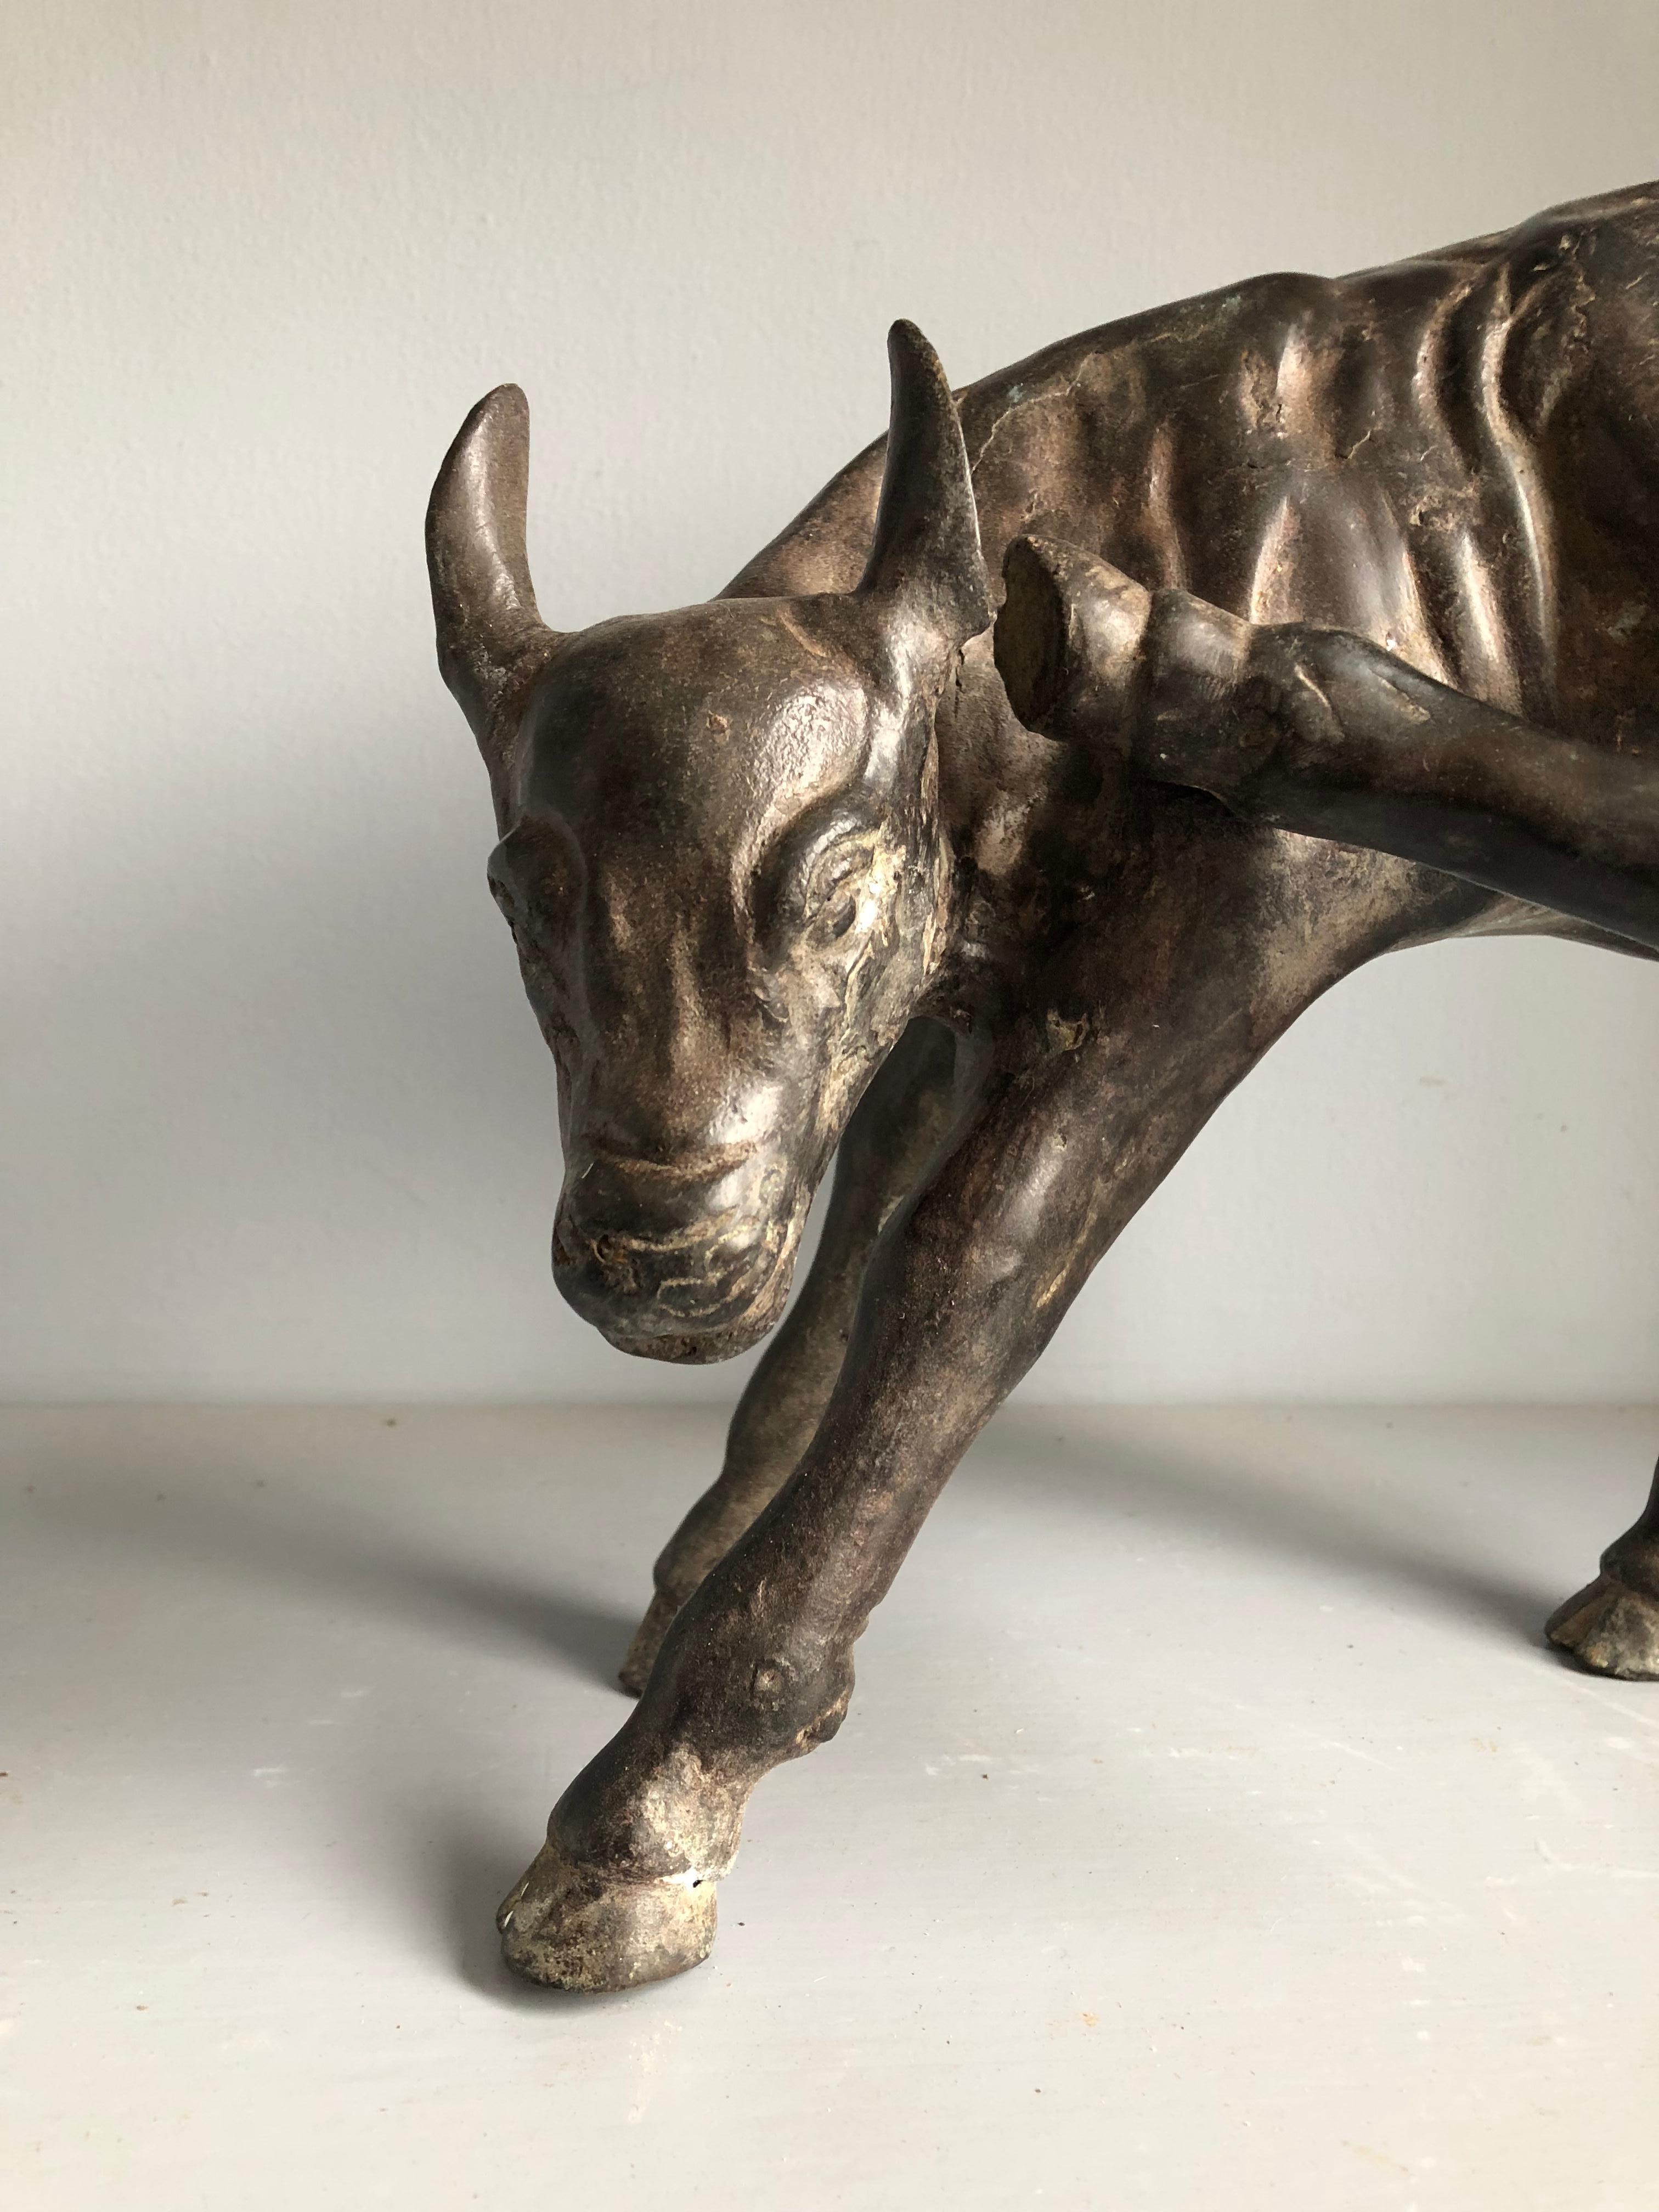 An early cast bronze sculpture of a calf scratching his ear with his hoof, 18th Century French, from the collection of Pierre Moulin, founder of the Pierre Deux shops and author of the French Country series of books.